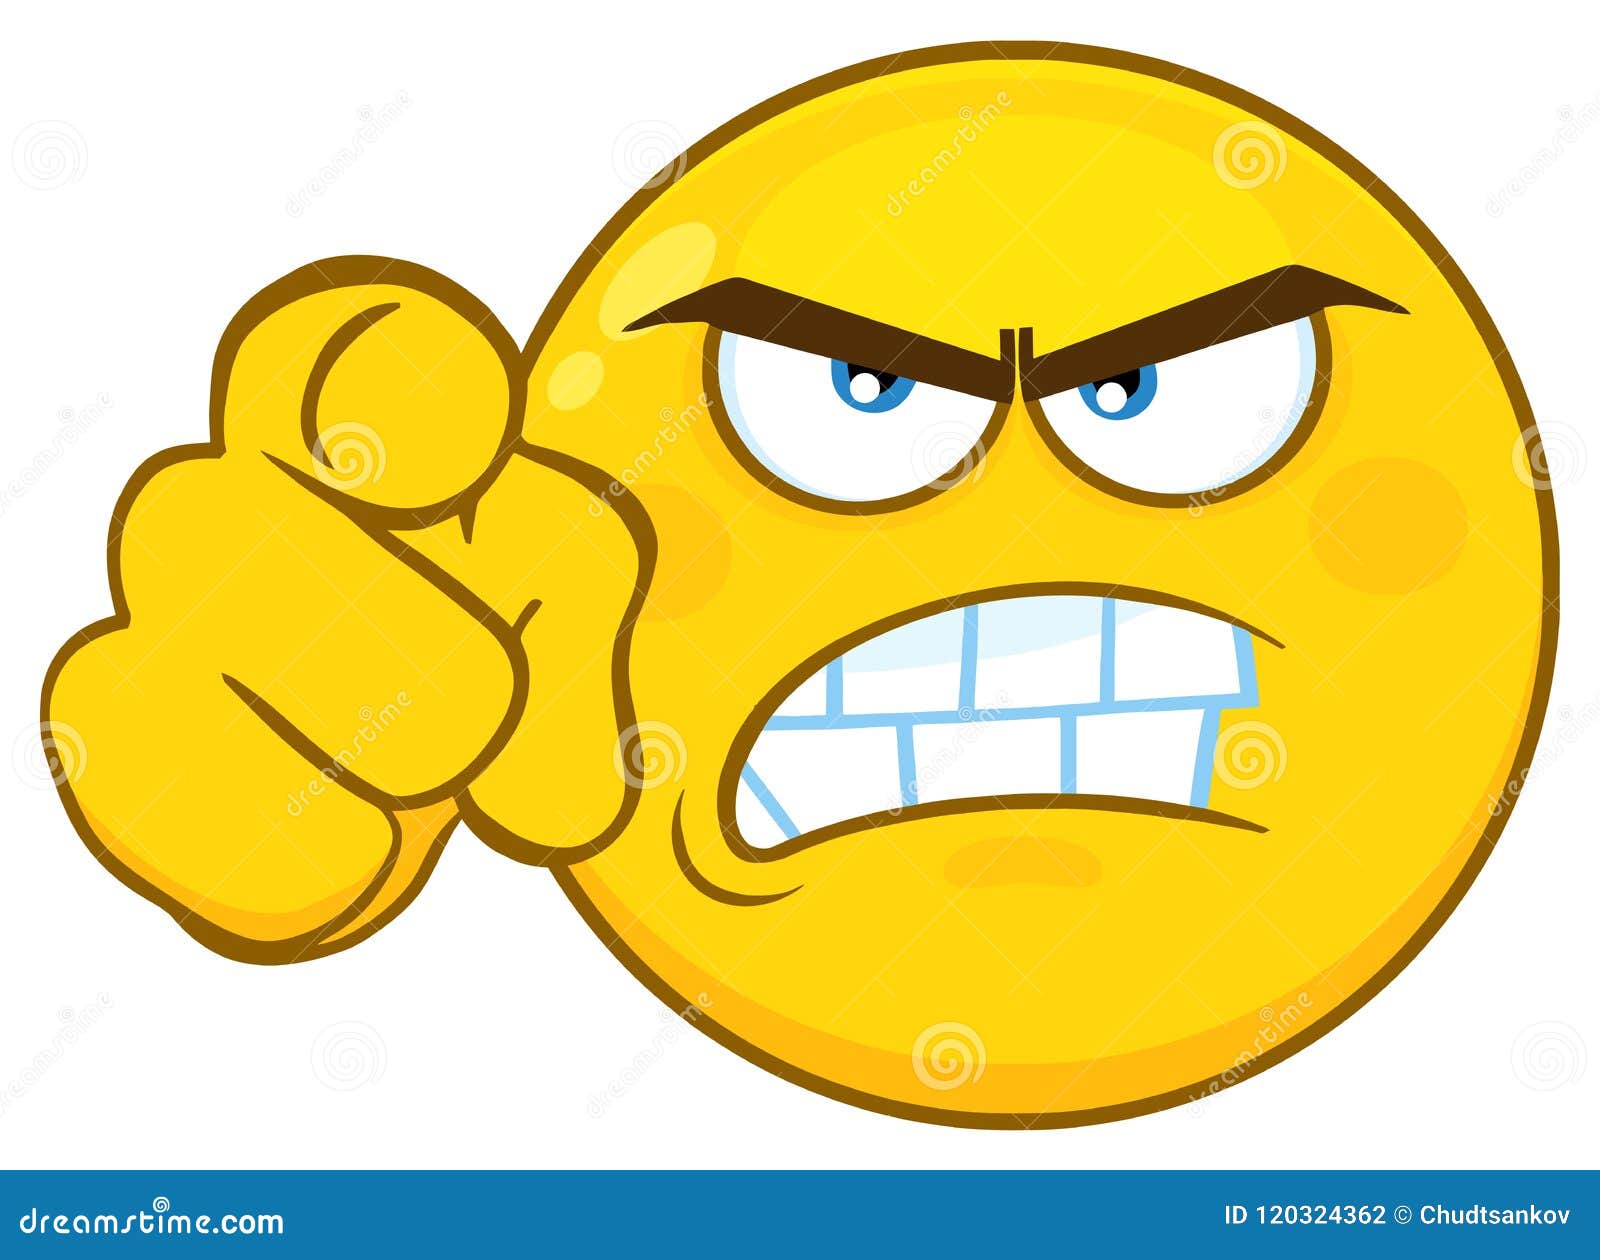 Angry Yellow Cartoon Emoji Face Character with Aggressive Expressions  Pointing Stock Vector - Illustration of angry, avatar: 120324362